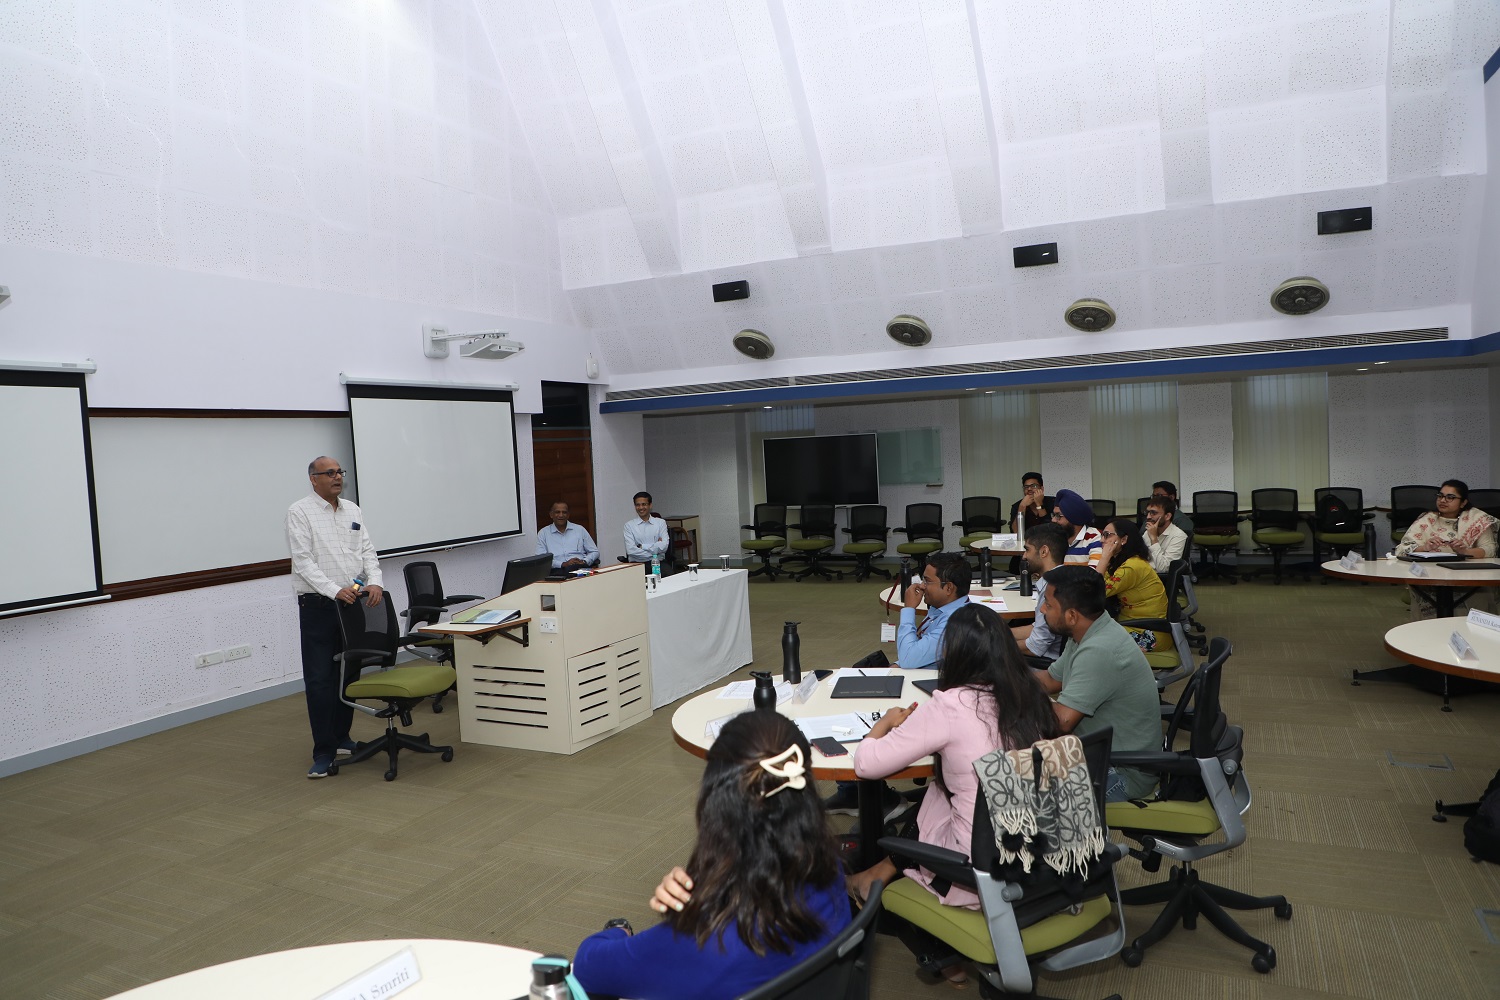 Prof. Chetan Subramanian, Dean - Faculty and Chairperson, Centre for Teaching and Learning, interacts with the participants of the CTL conference.